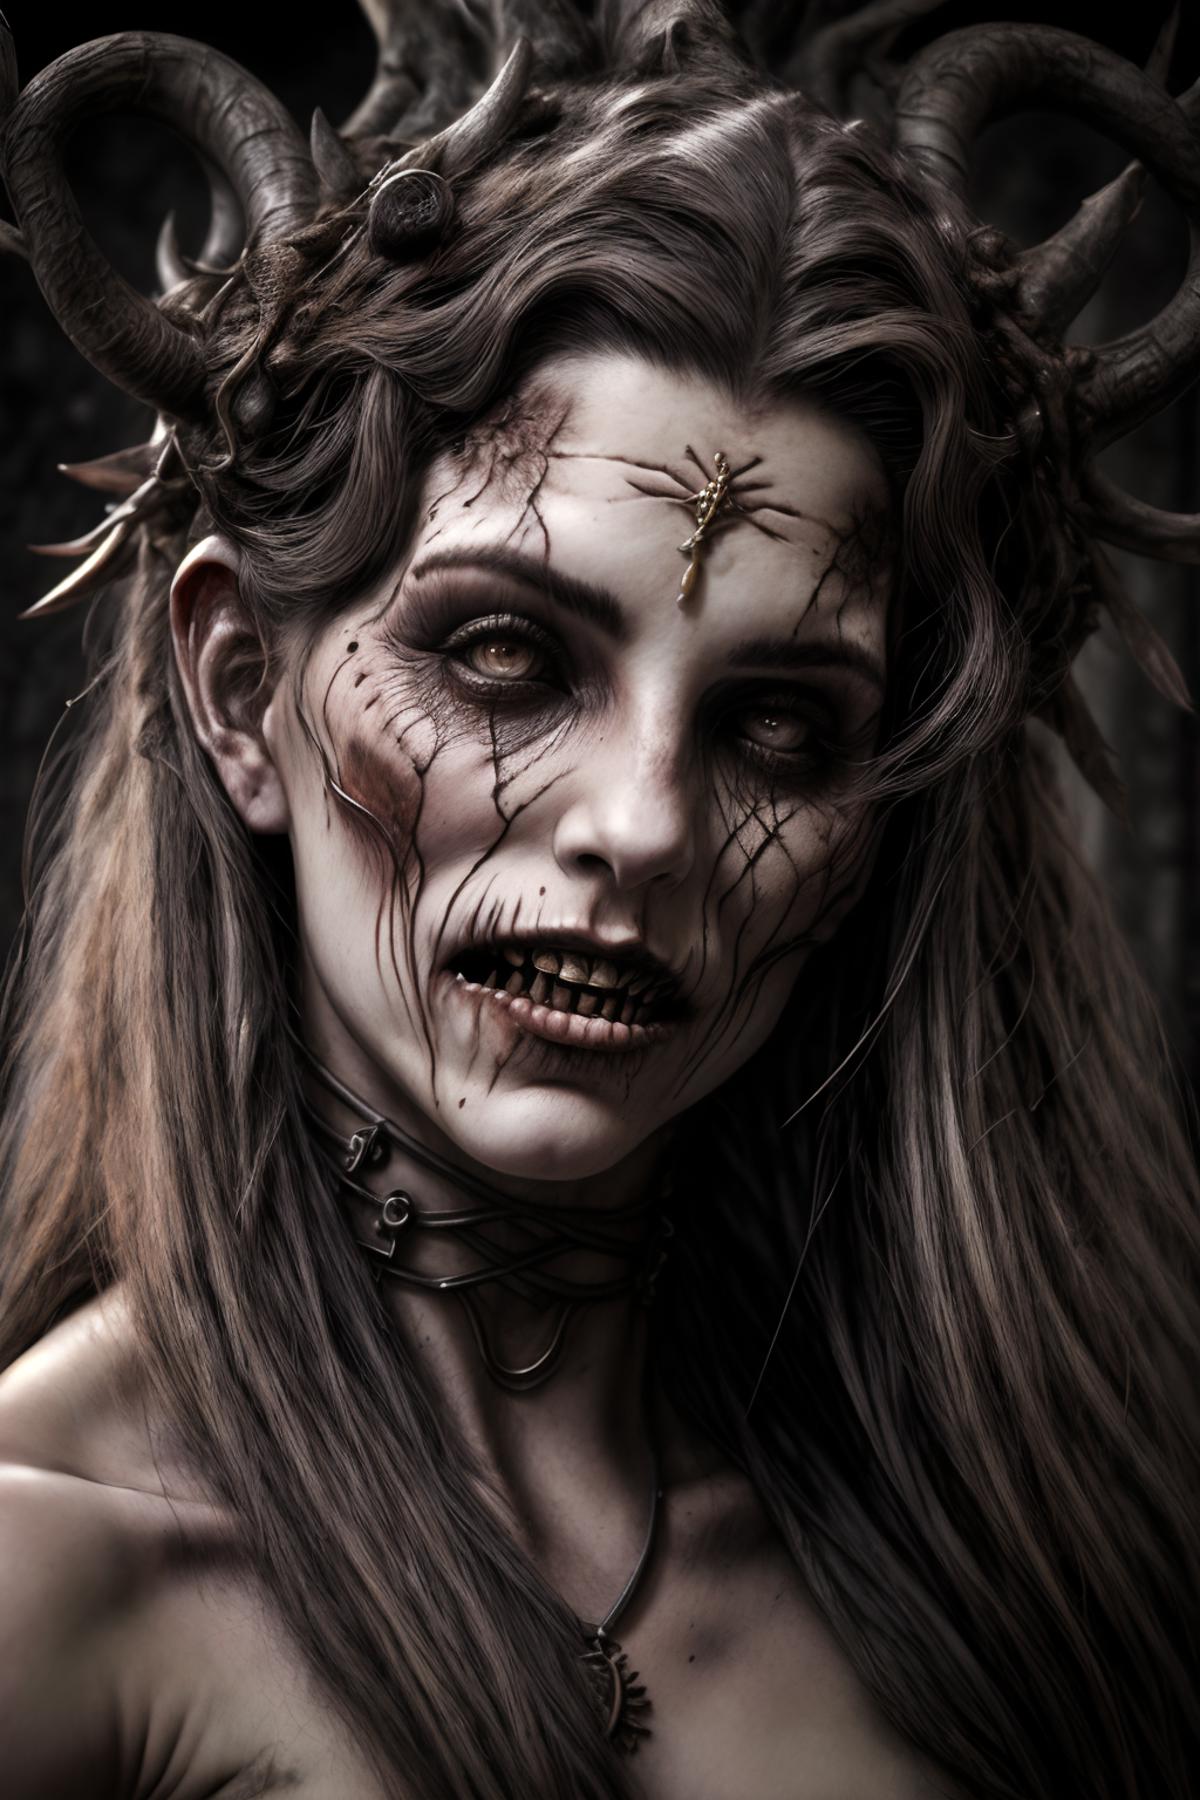 A scary image of a woman with horns and a cross on her forehead.